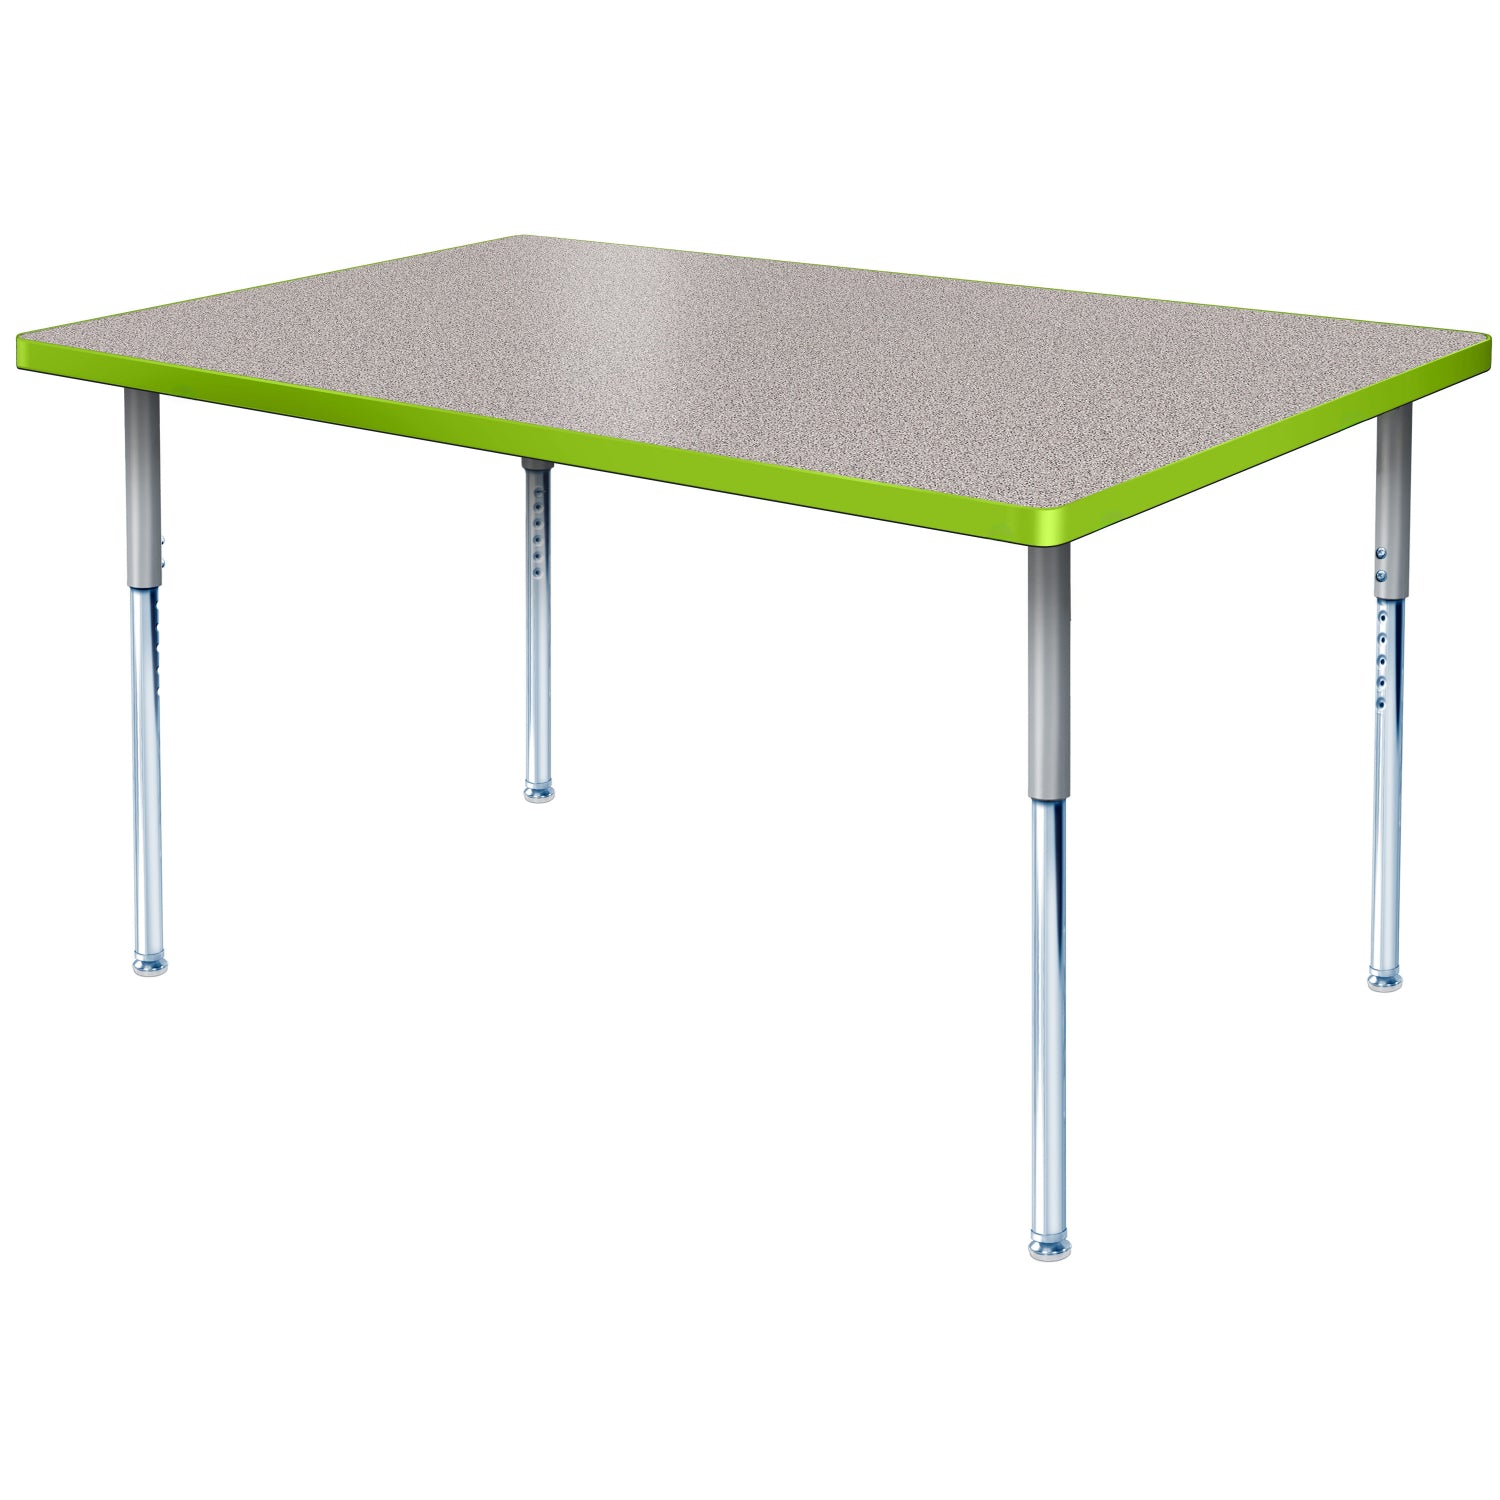 Modern Classic Series 30 x 48" Rectangular Activity Table with High Pressure Laminate Top, Adjustable Height Legs